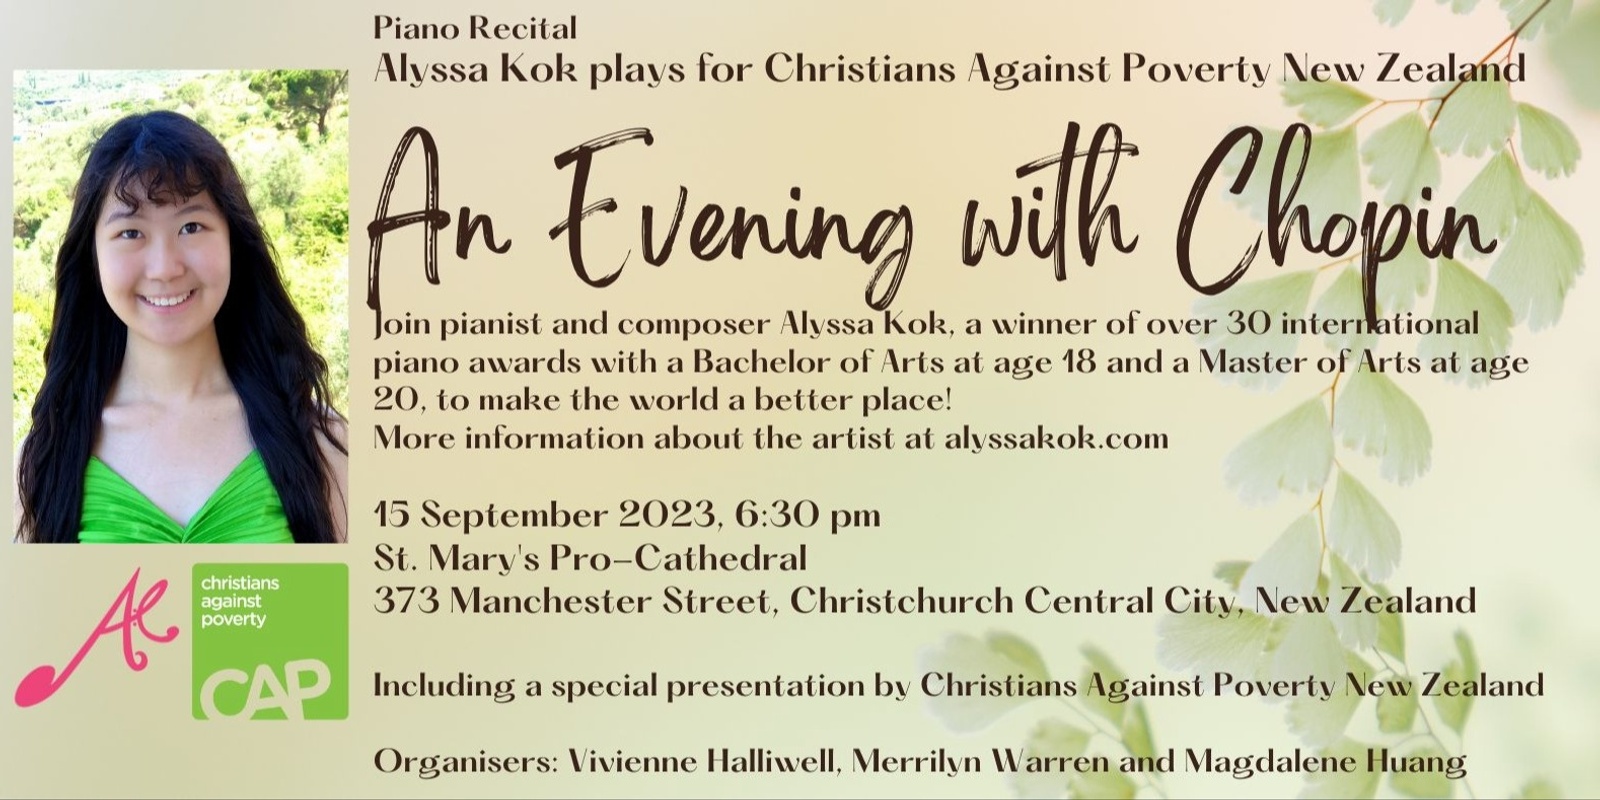 Banner image for Piano Recital by Alyssa Kok for Christians Against Poverty New Zealand